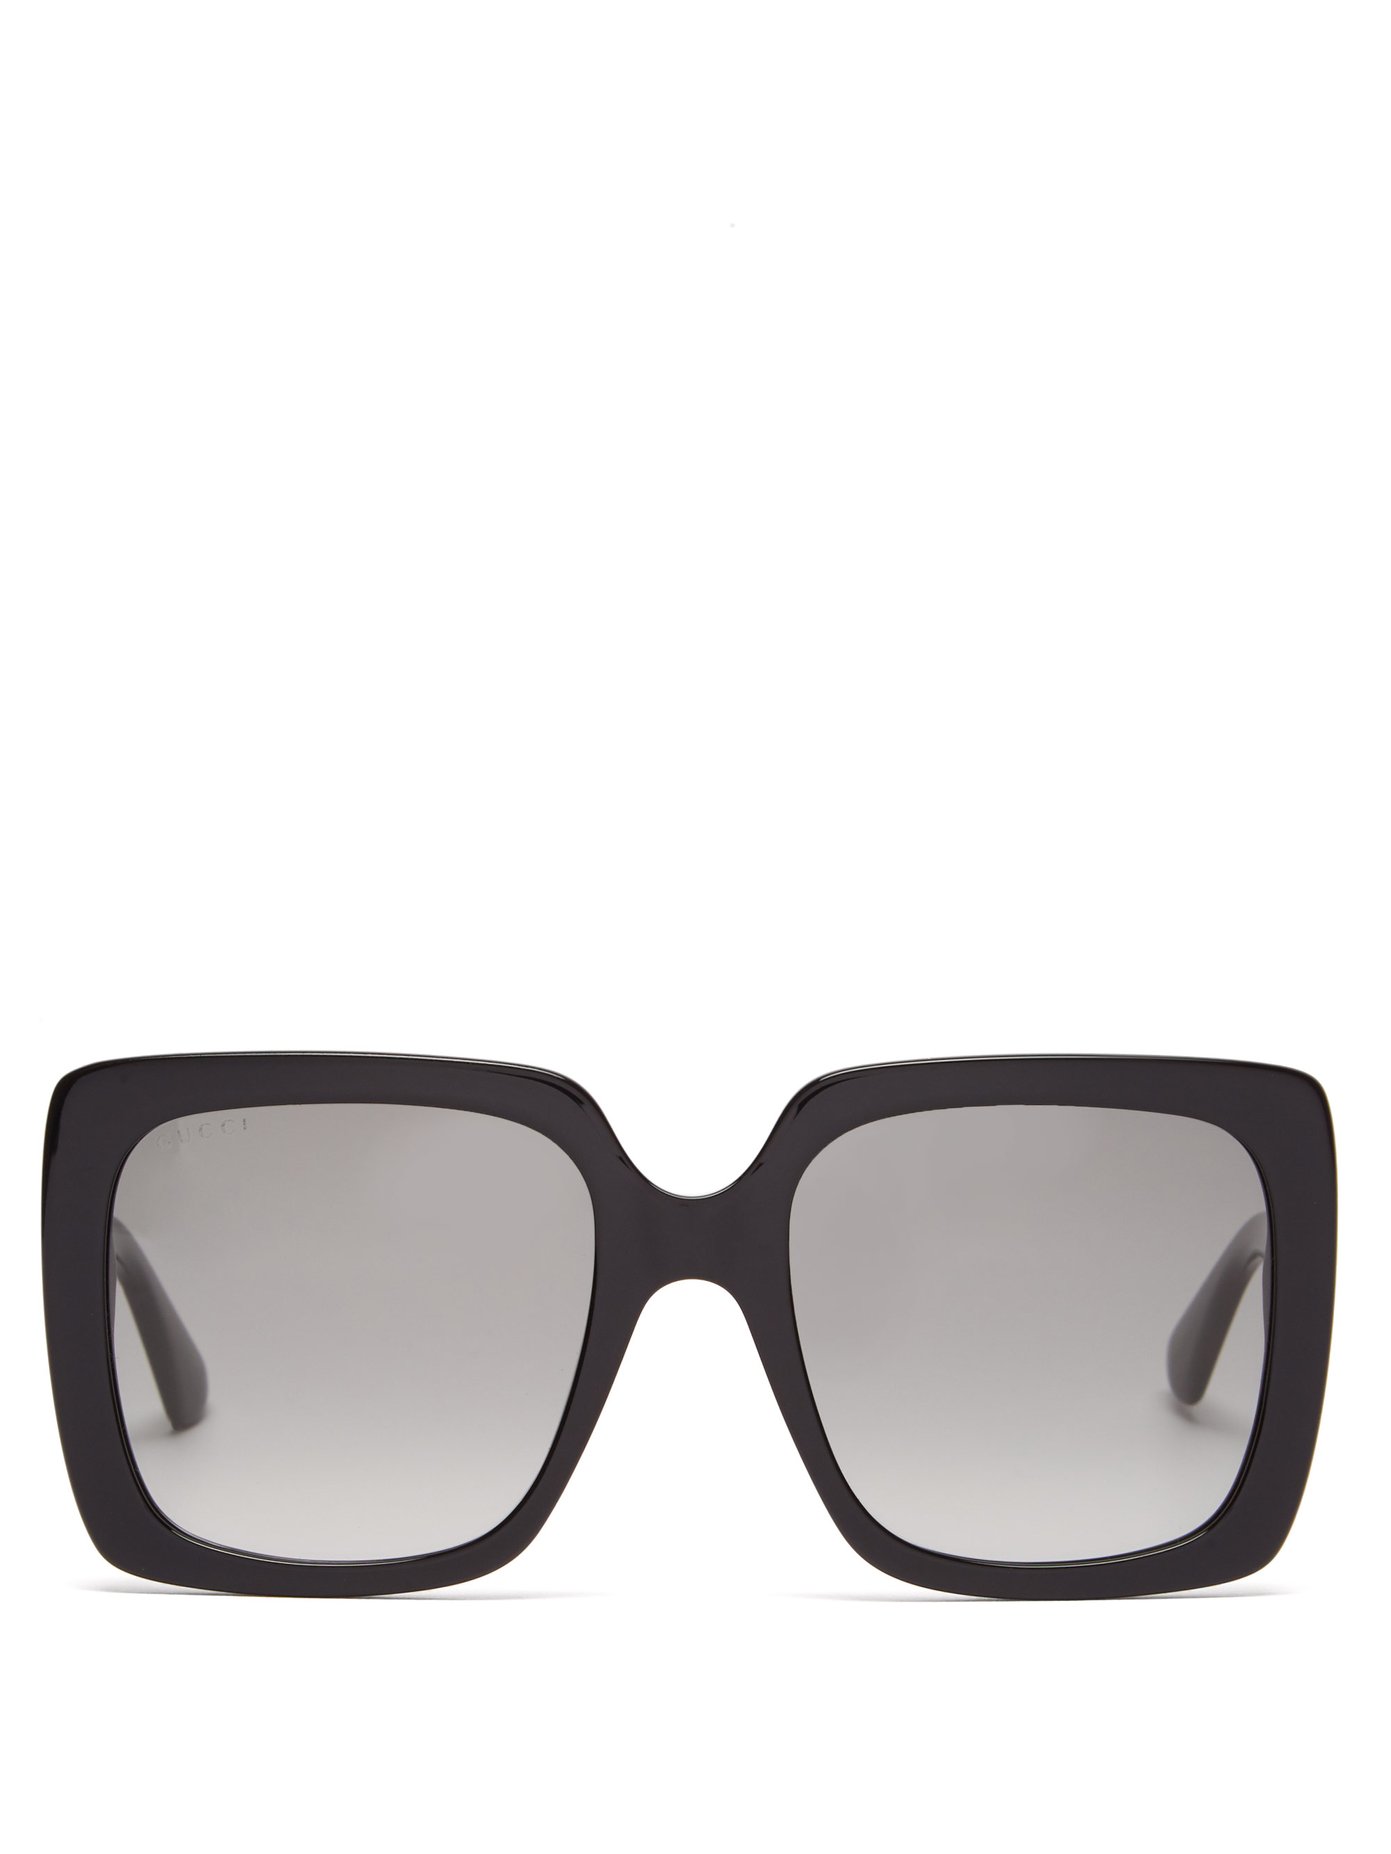 gucci oversized acetate sunglasses with crystals